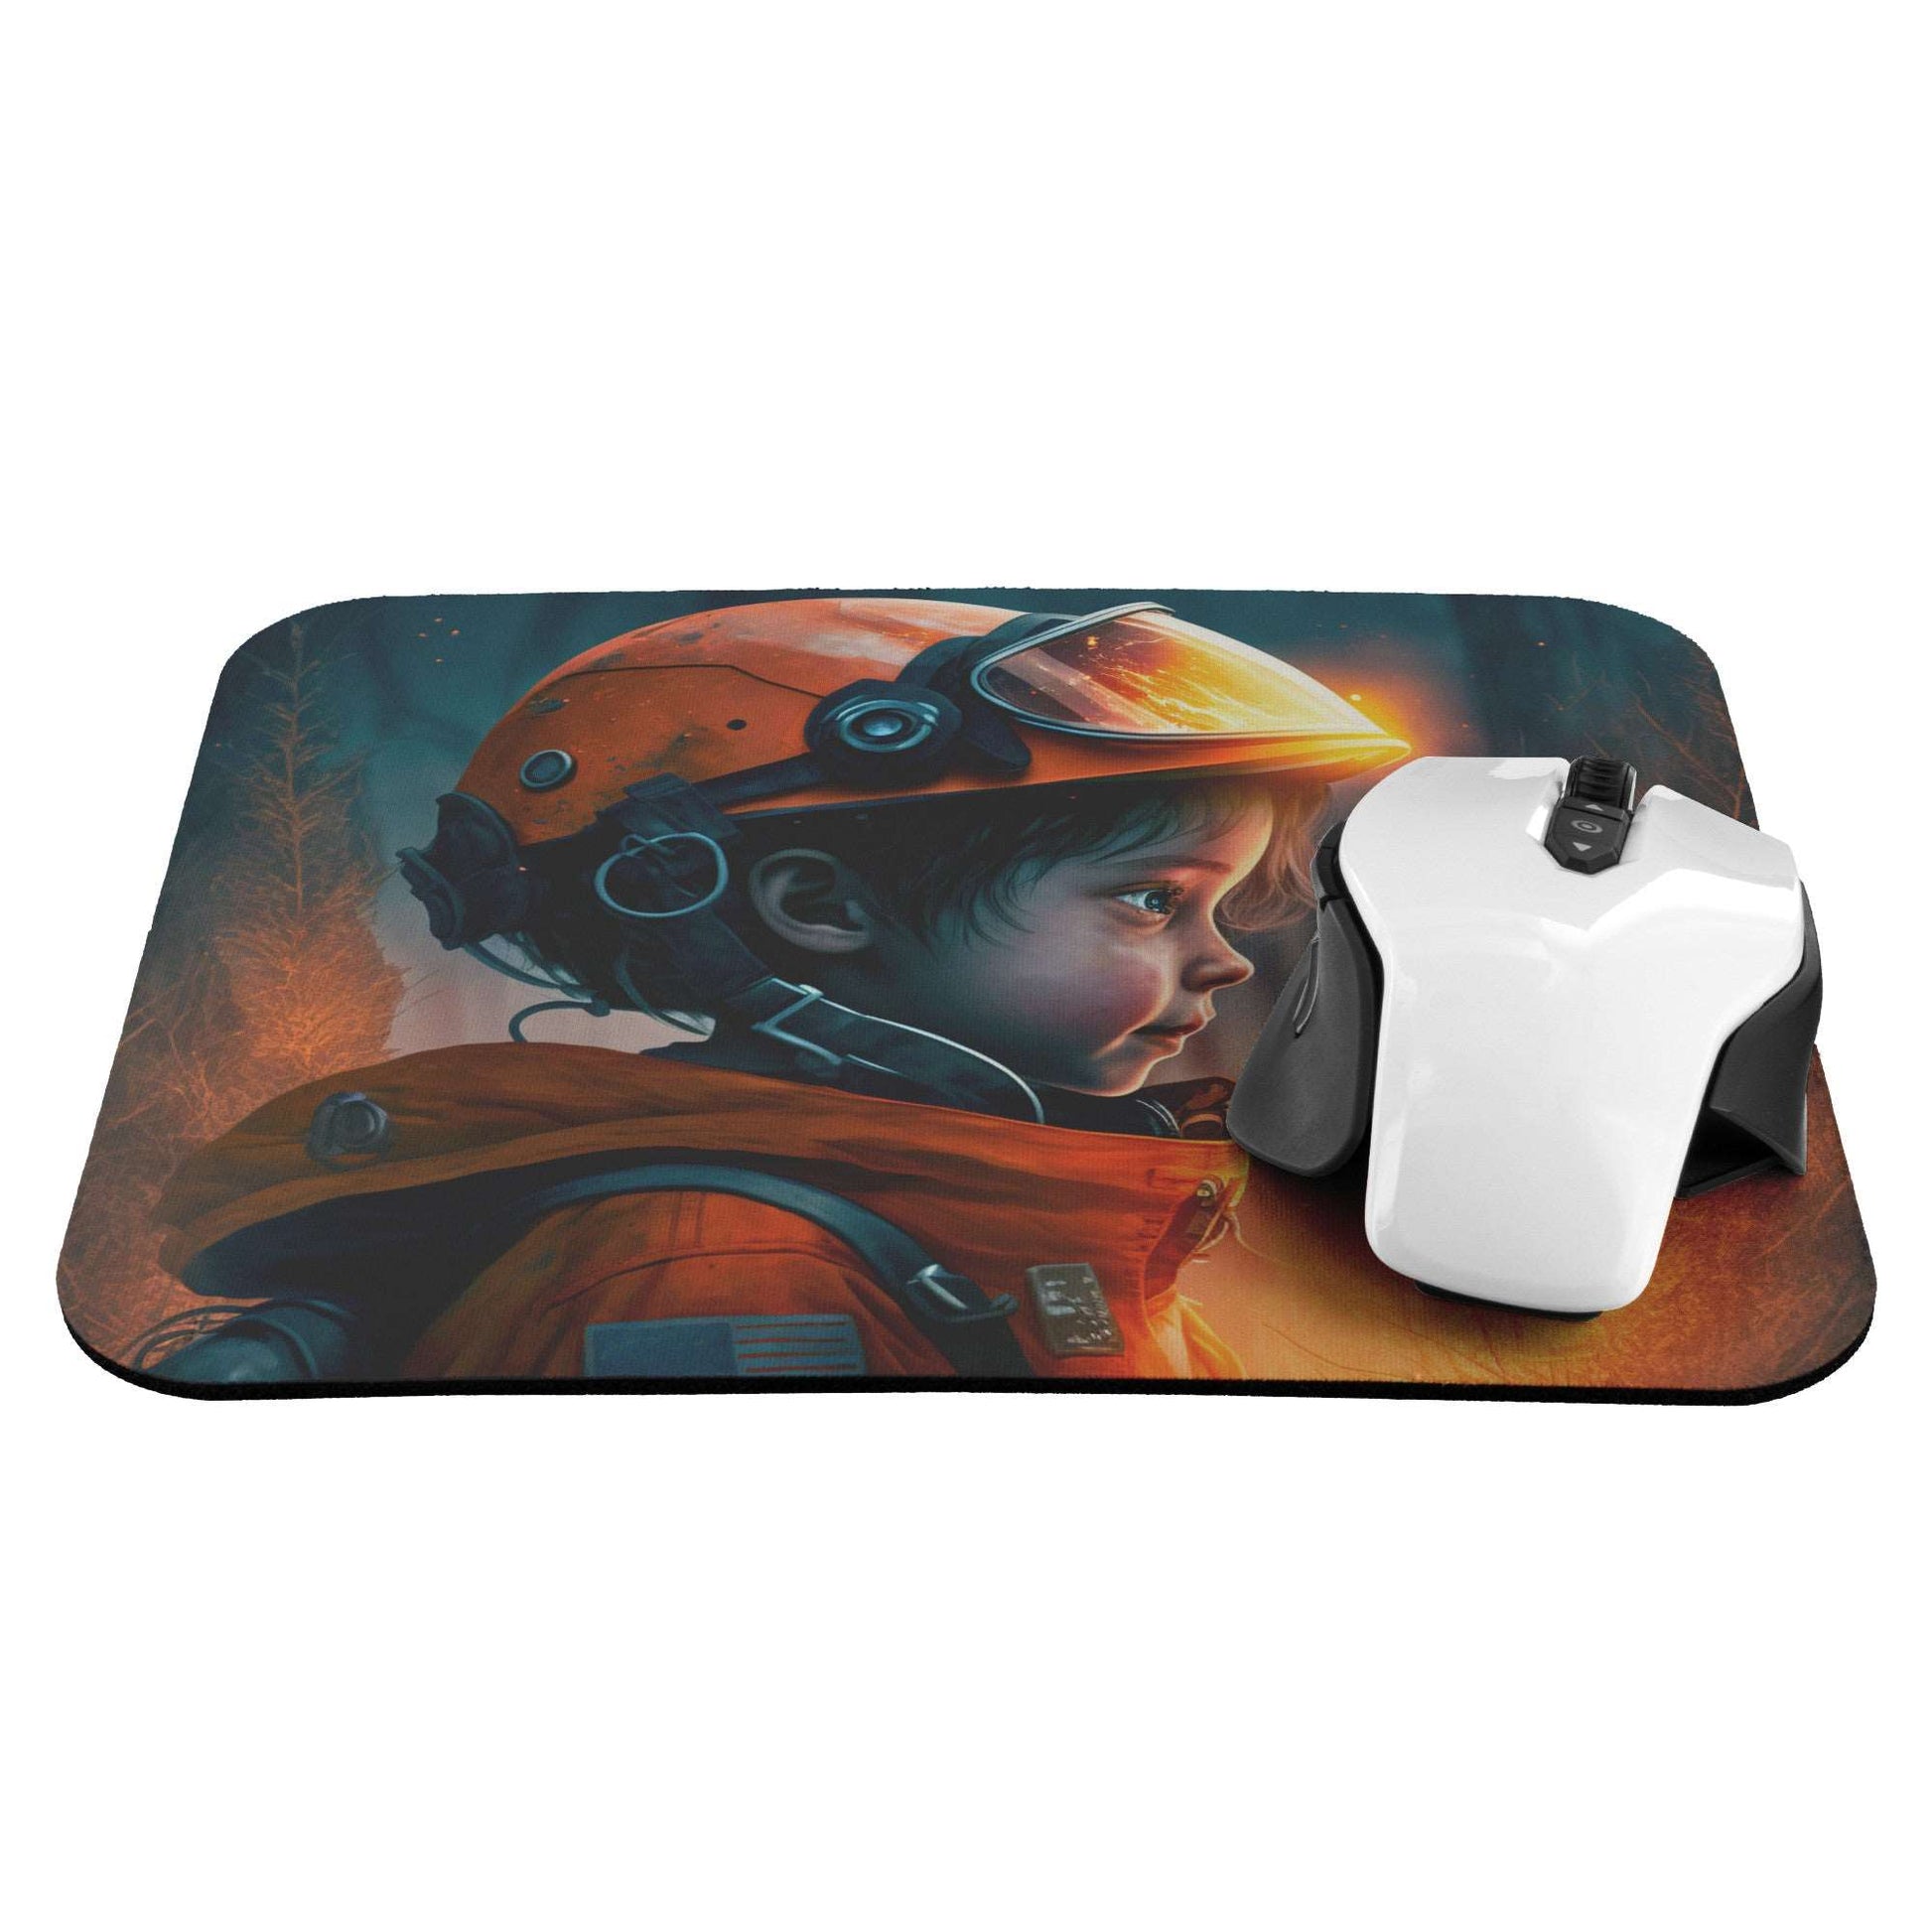 Mouse Pad - Jimmy the Firefighter